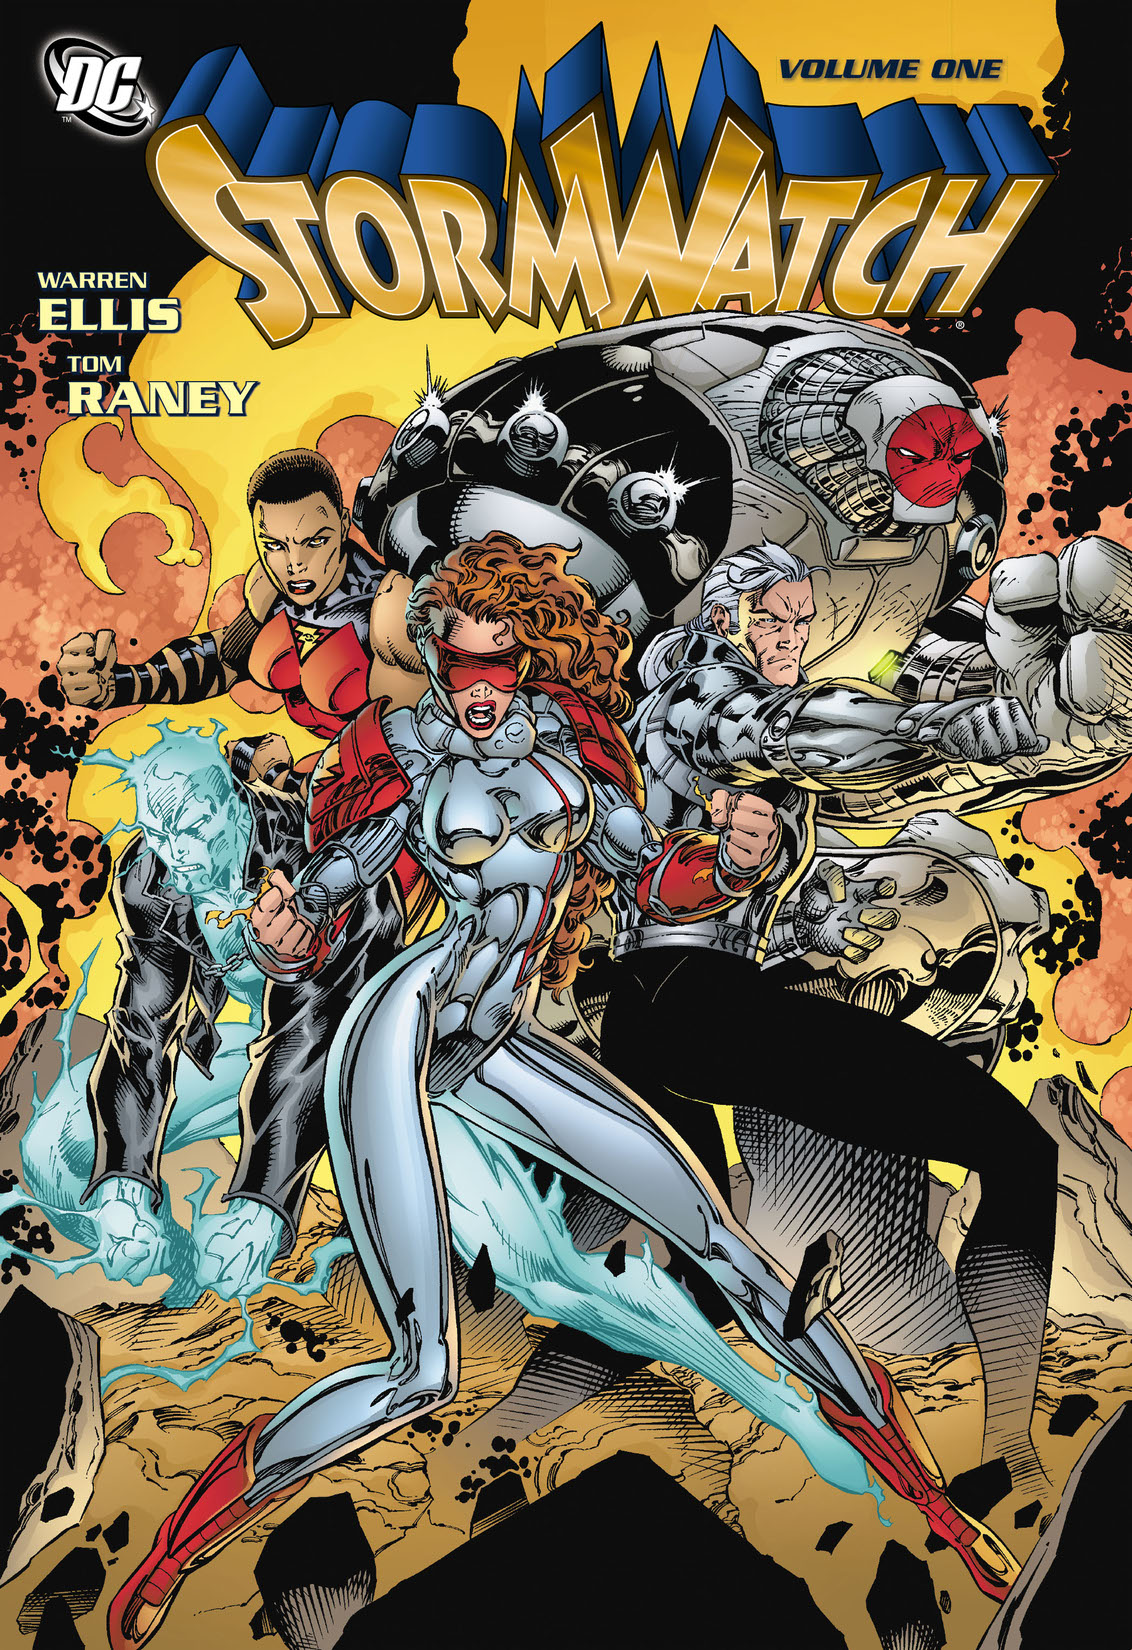 Stormwatch Vol. 1 preview images